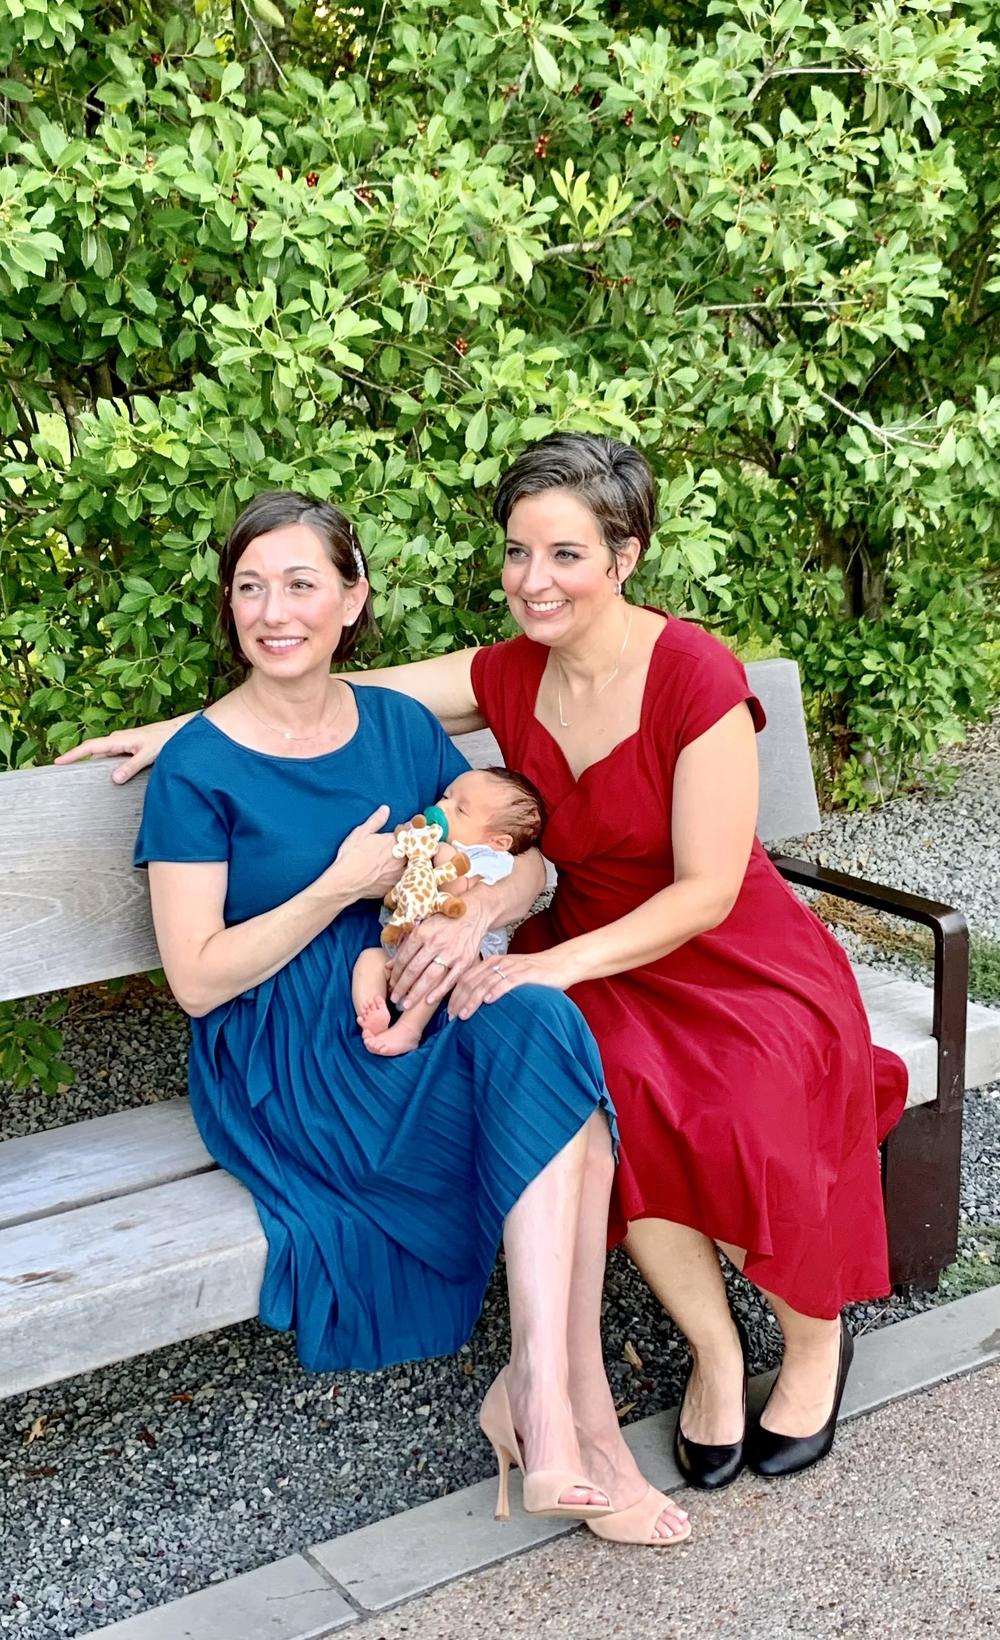 Now that the wedding is behind them, Molly Pela (right) can begin the adoption process of the couple's new son. Carlie Brown (left) gave birth to the boy six days before the Supreme Court's ruling overturning <em>Roe v. Wade</em>.